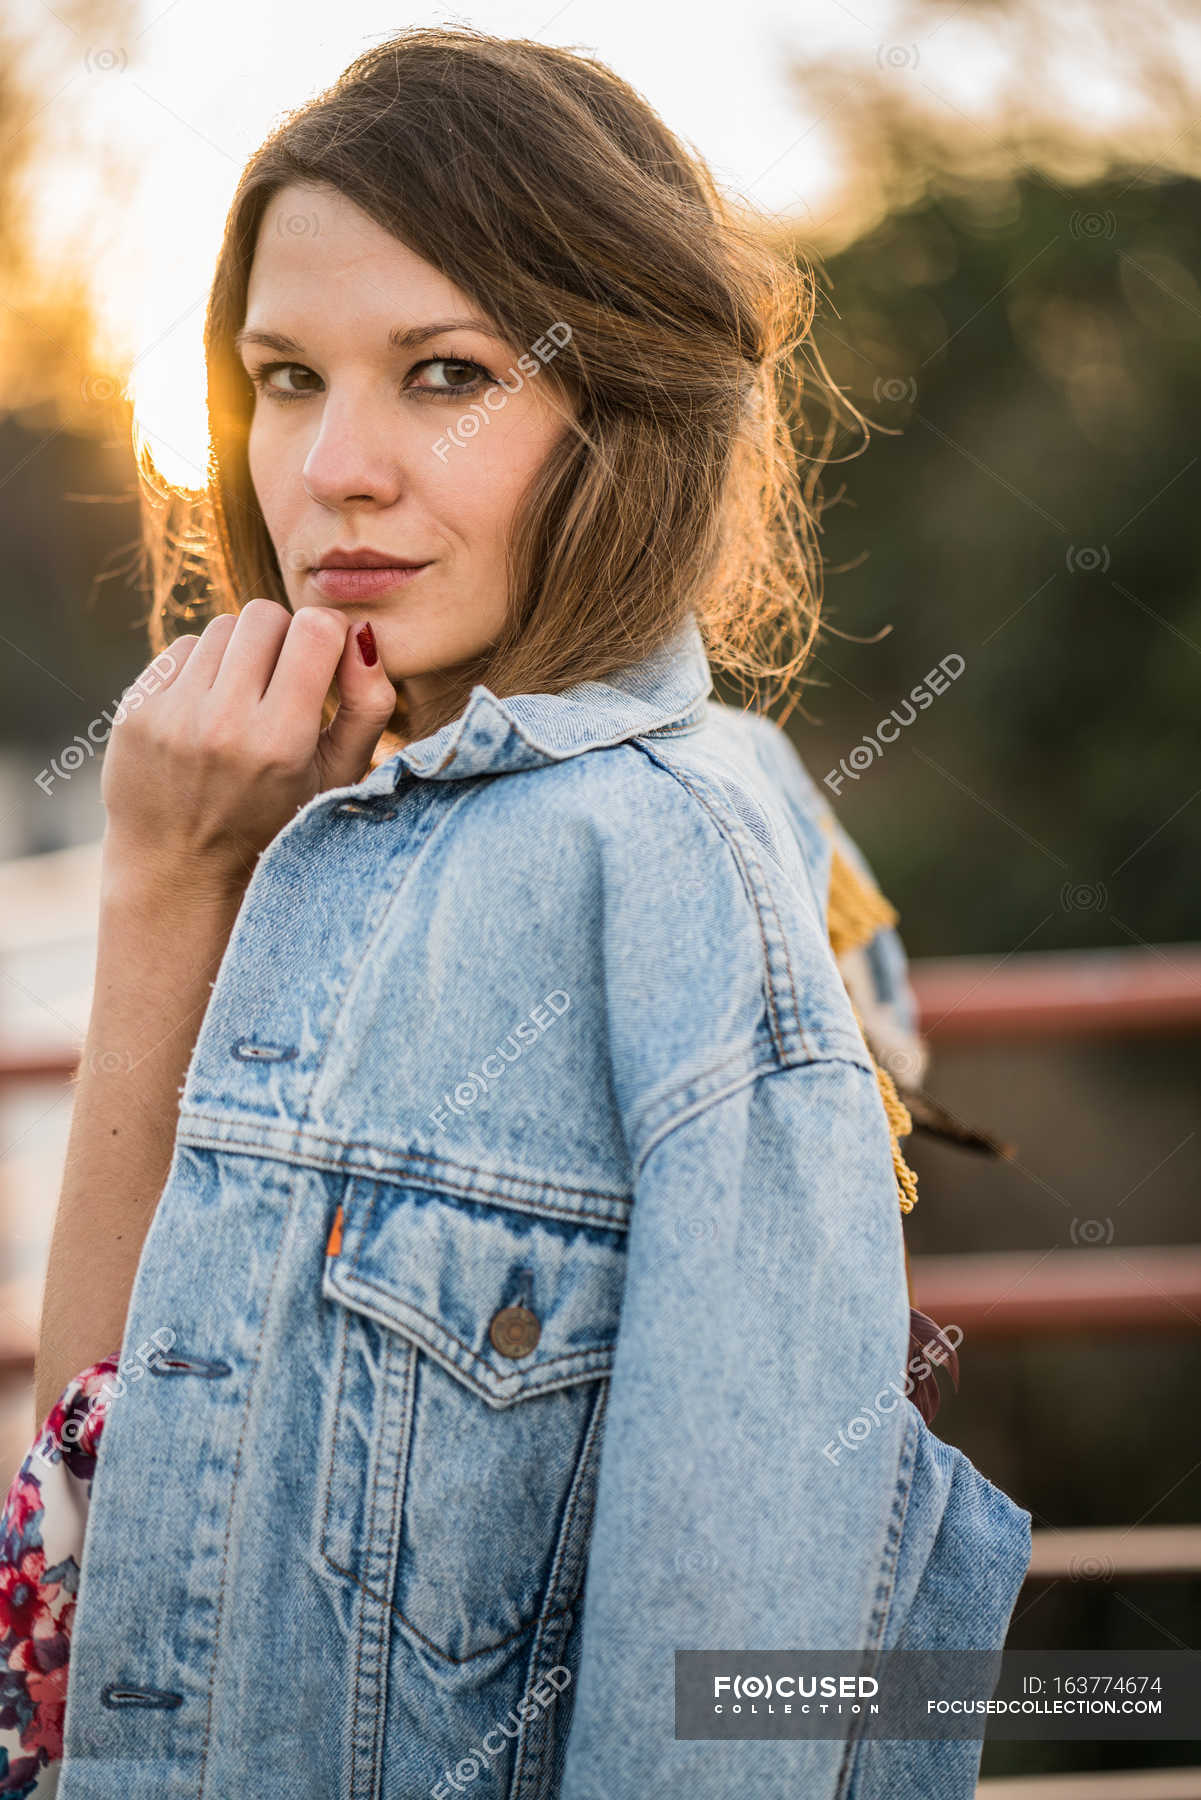 Fashionable Handsome Male Model With Hairstyle In Denim Fashion Jeans  Clothes On The Street Stock Photo  Download Image Now  iStock